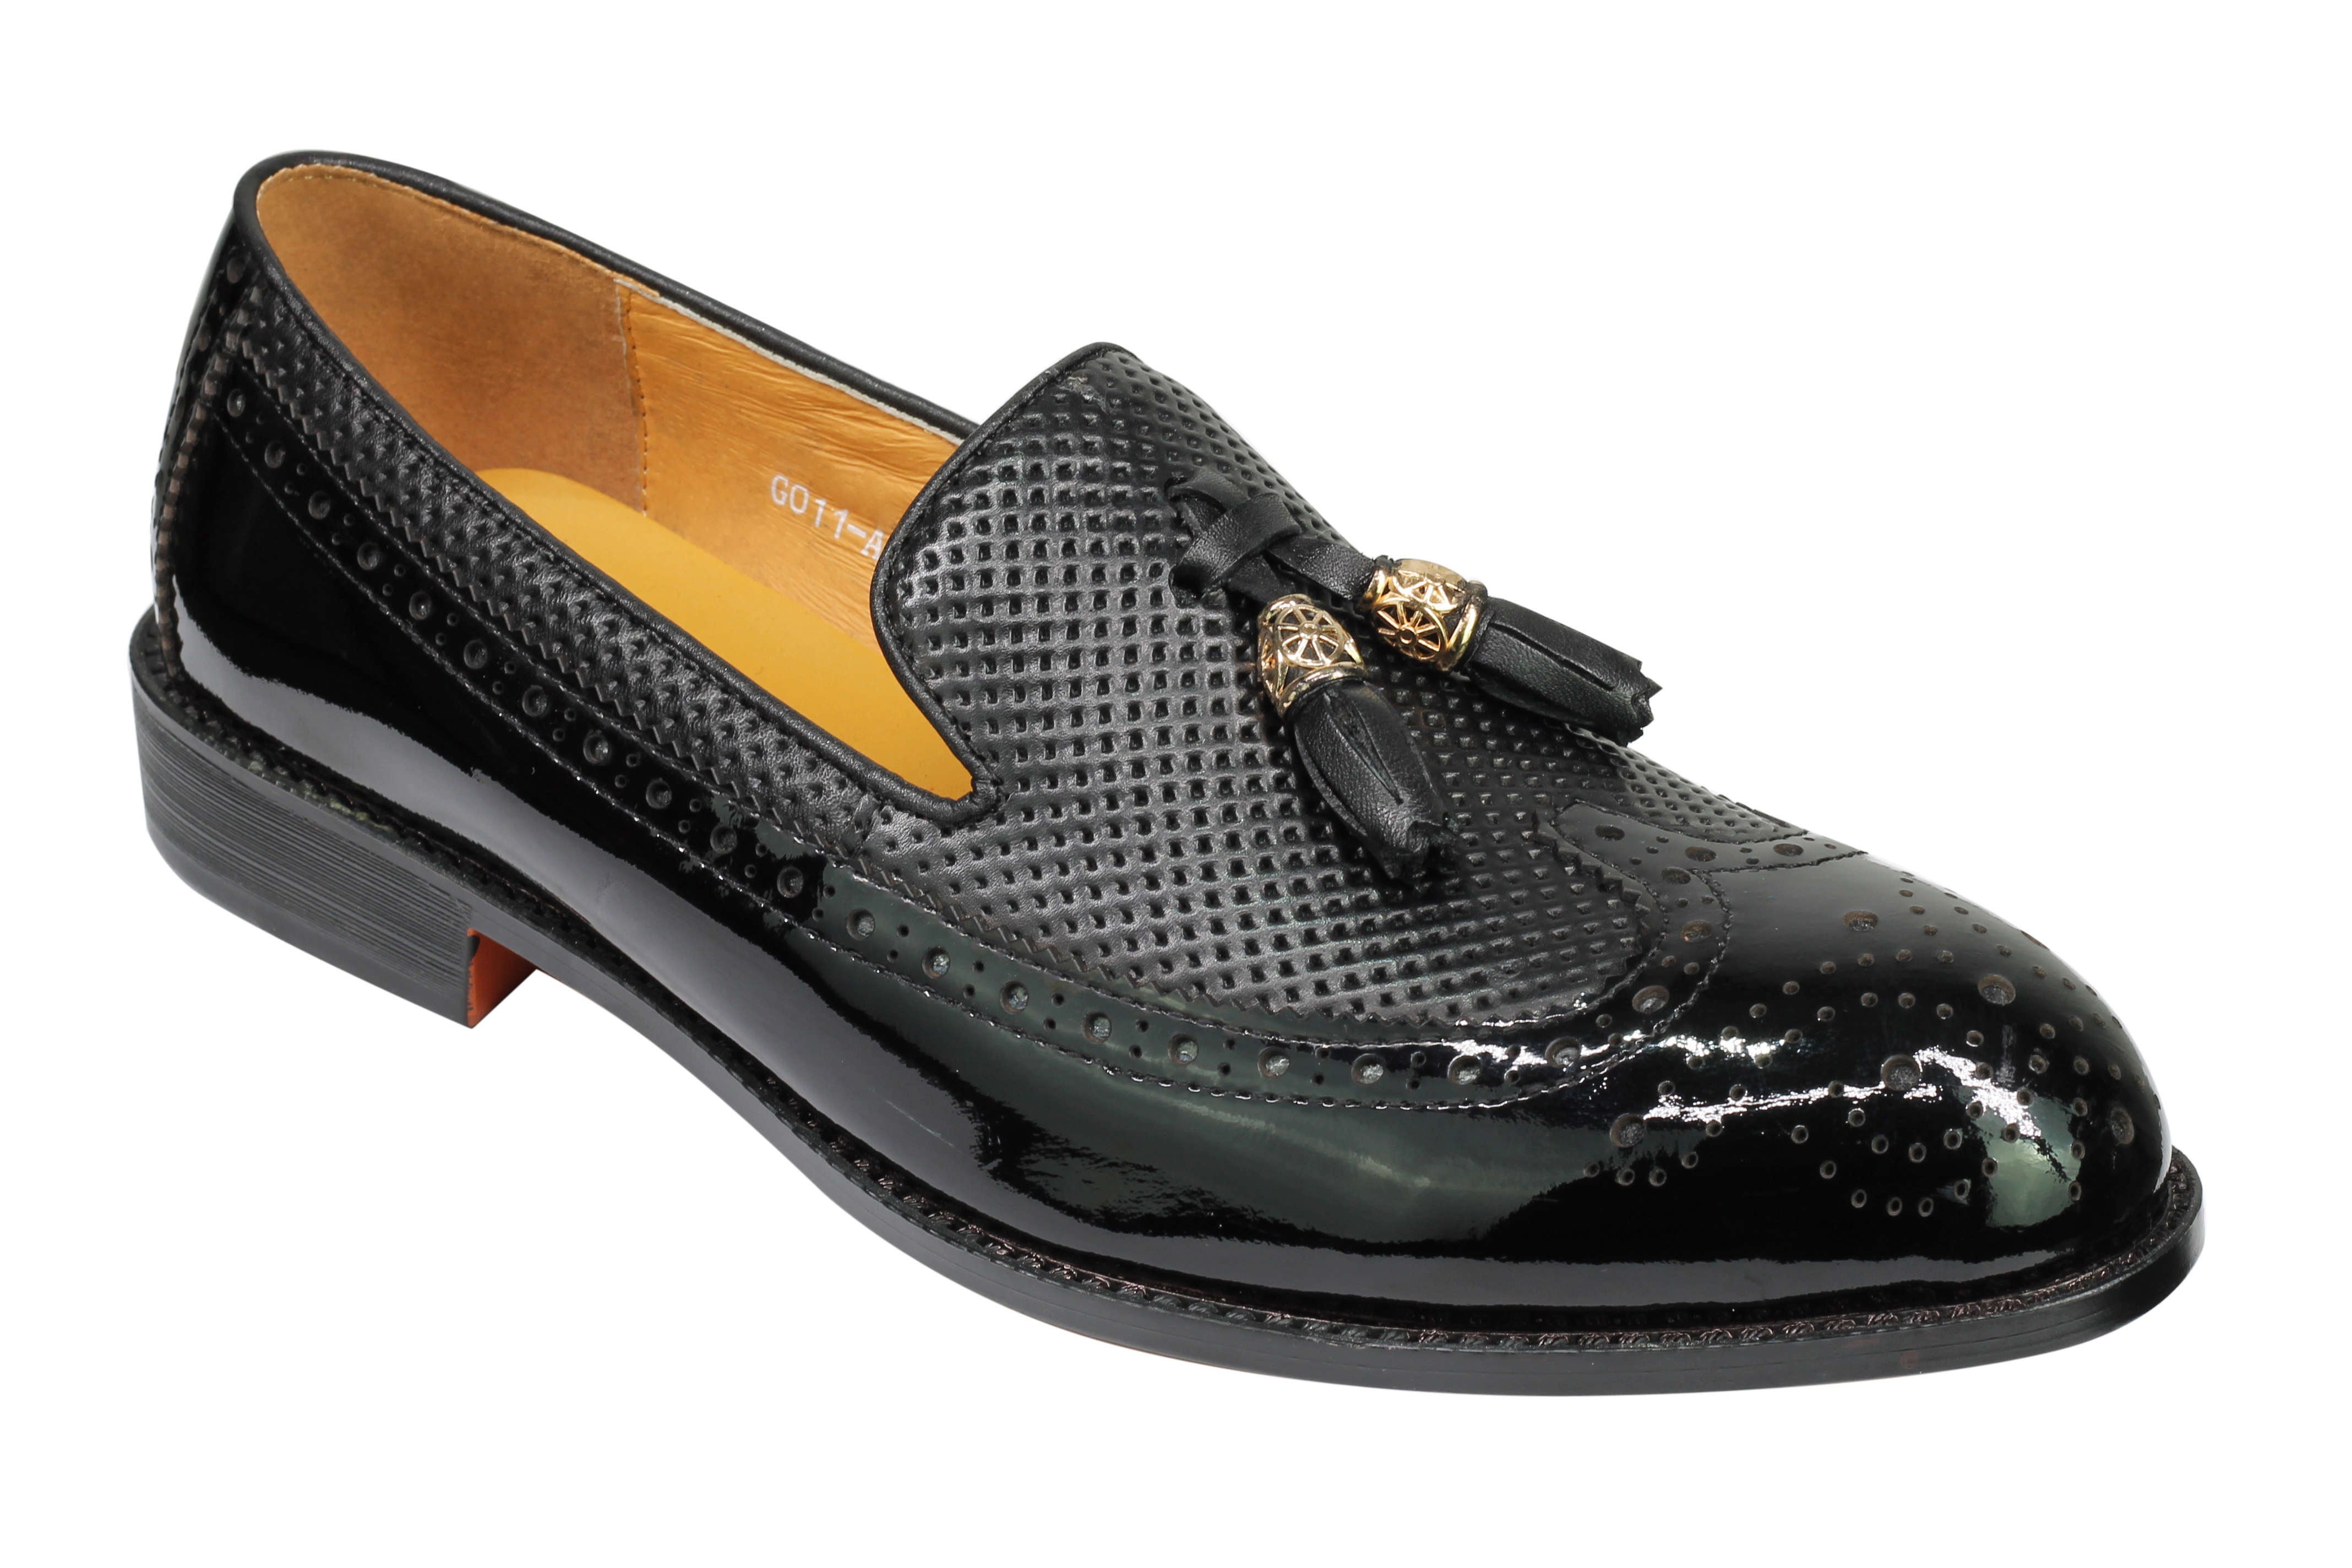 Real Leather Tassel Slip Brogue Loafers